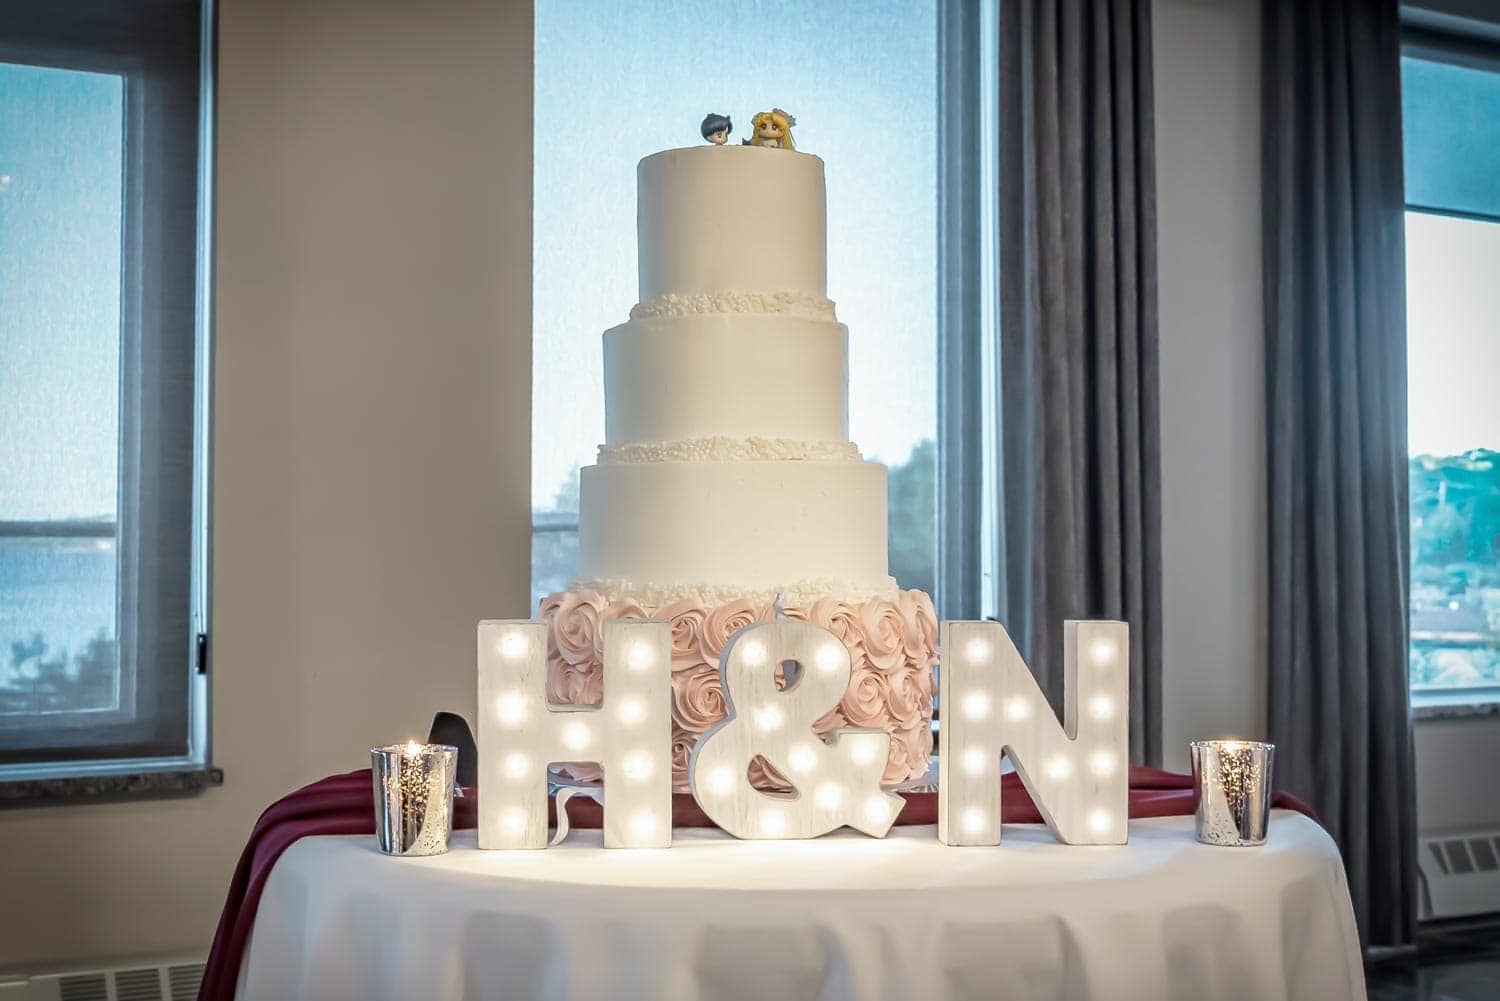 A 4 tier wedding cake with figurine wedding cake toppers and marquee letters lit up at the Bedford Basin Market.